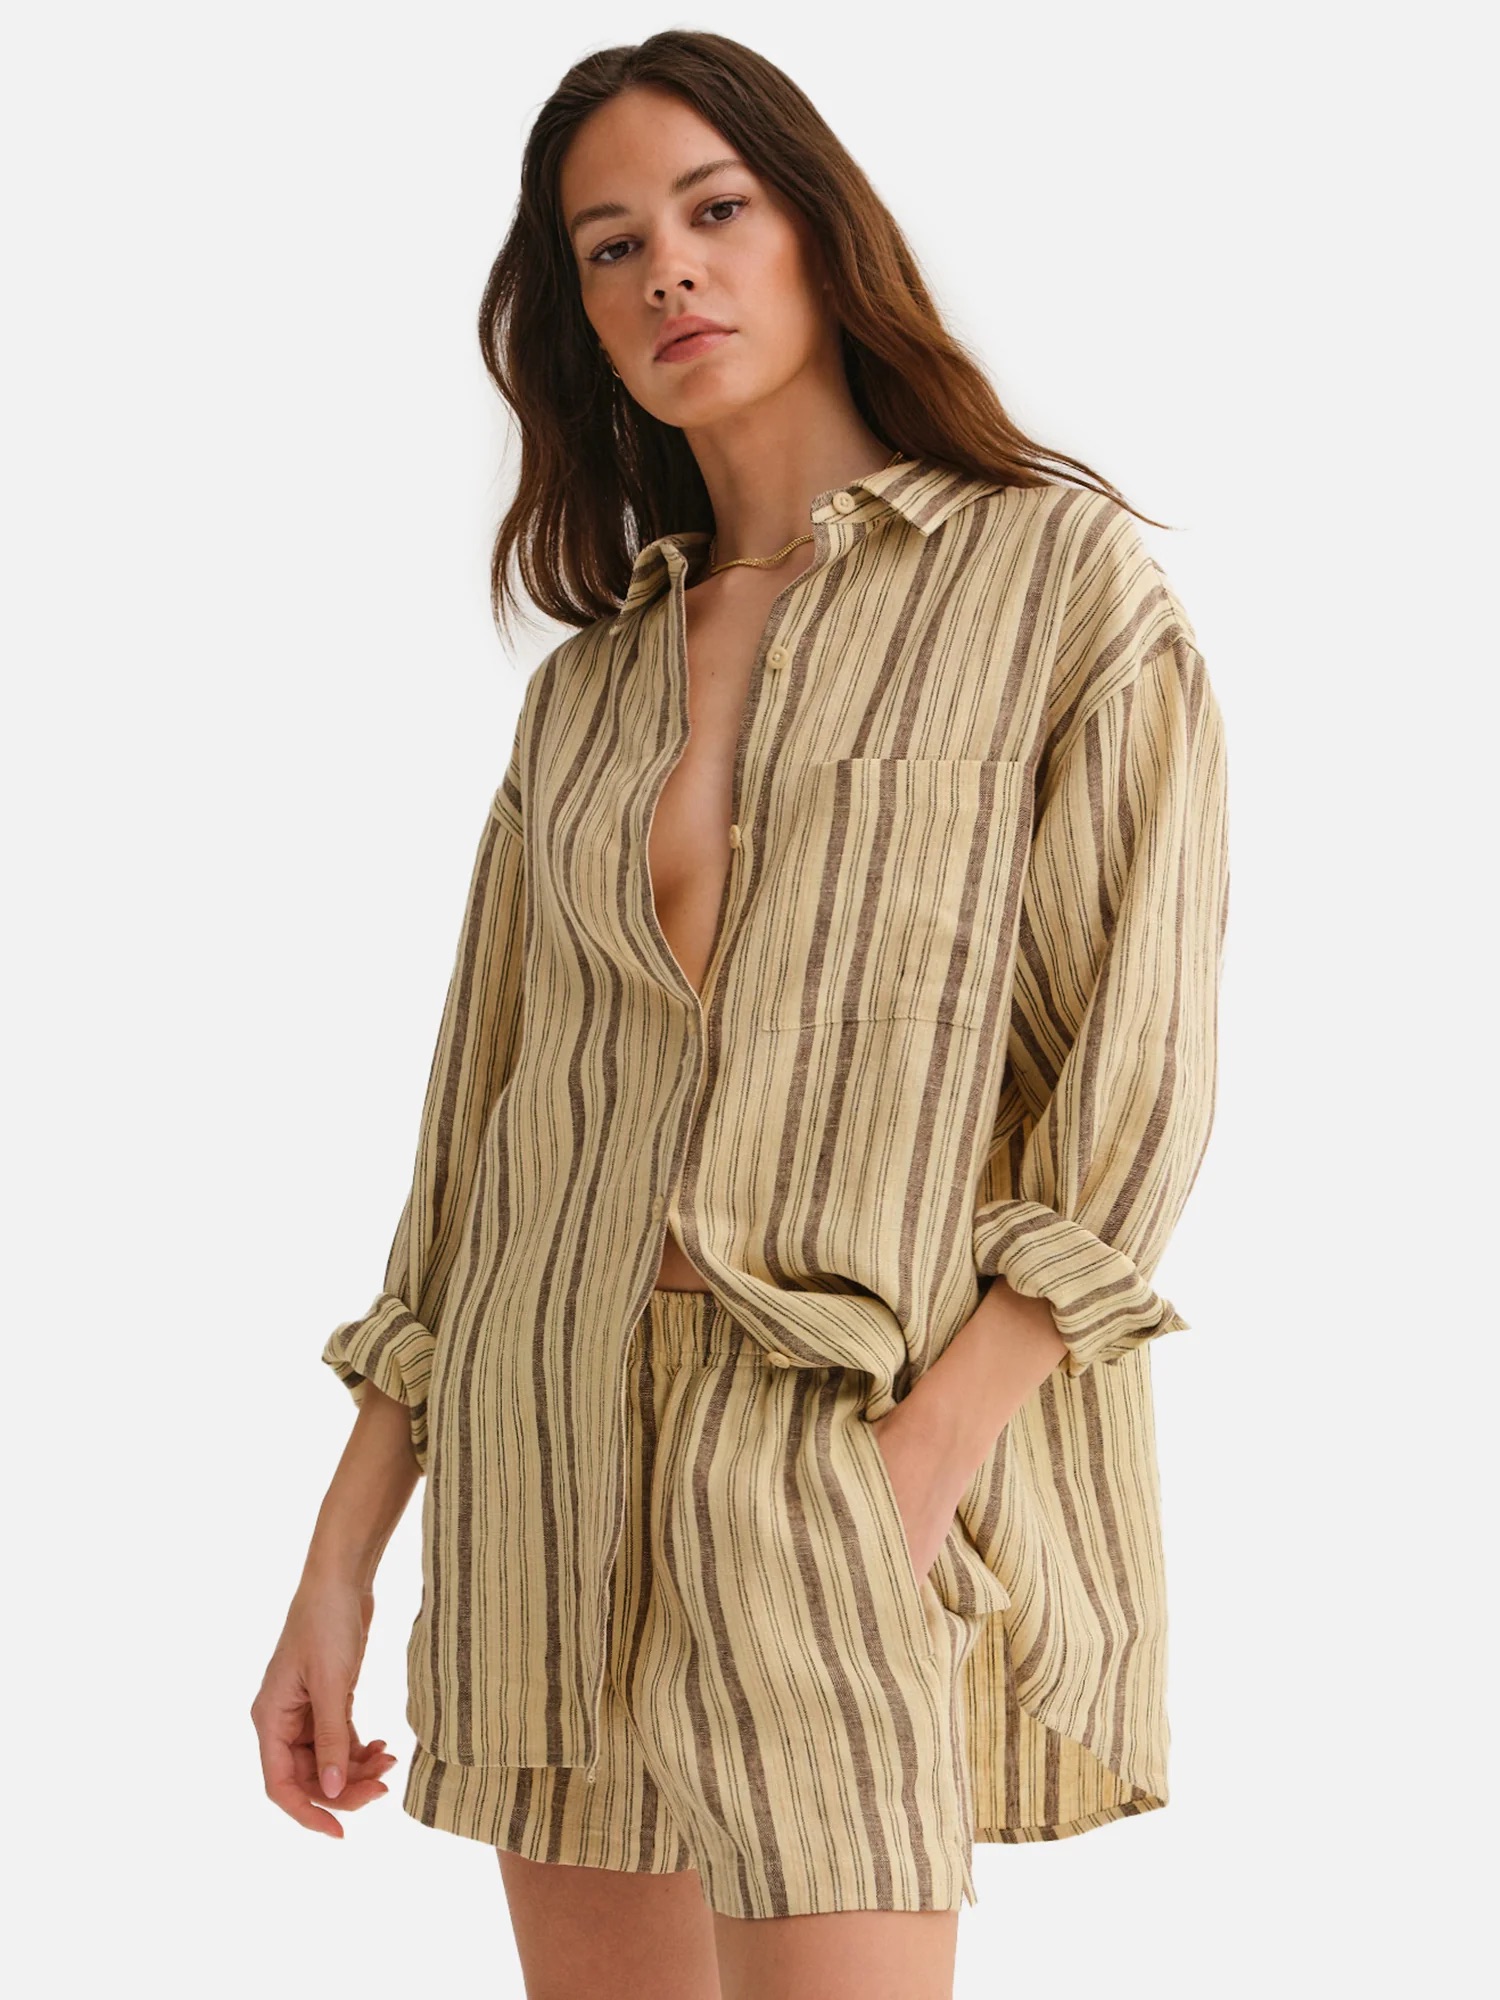 A woman wearing a loose-fitting striped shirt-dress, standing with one hand slightly raised, against a plain background.